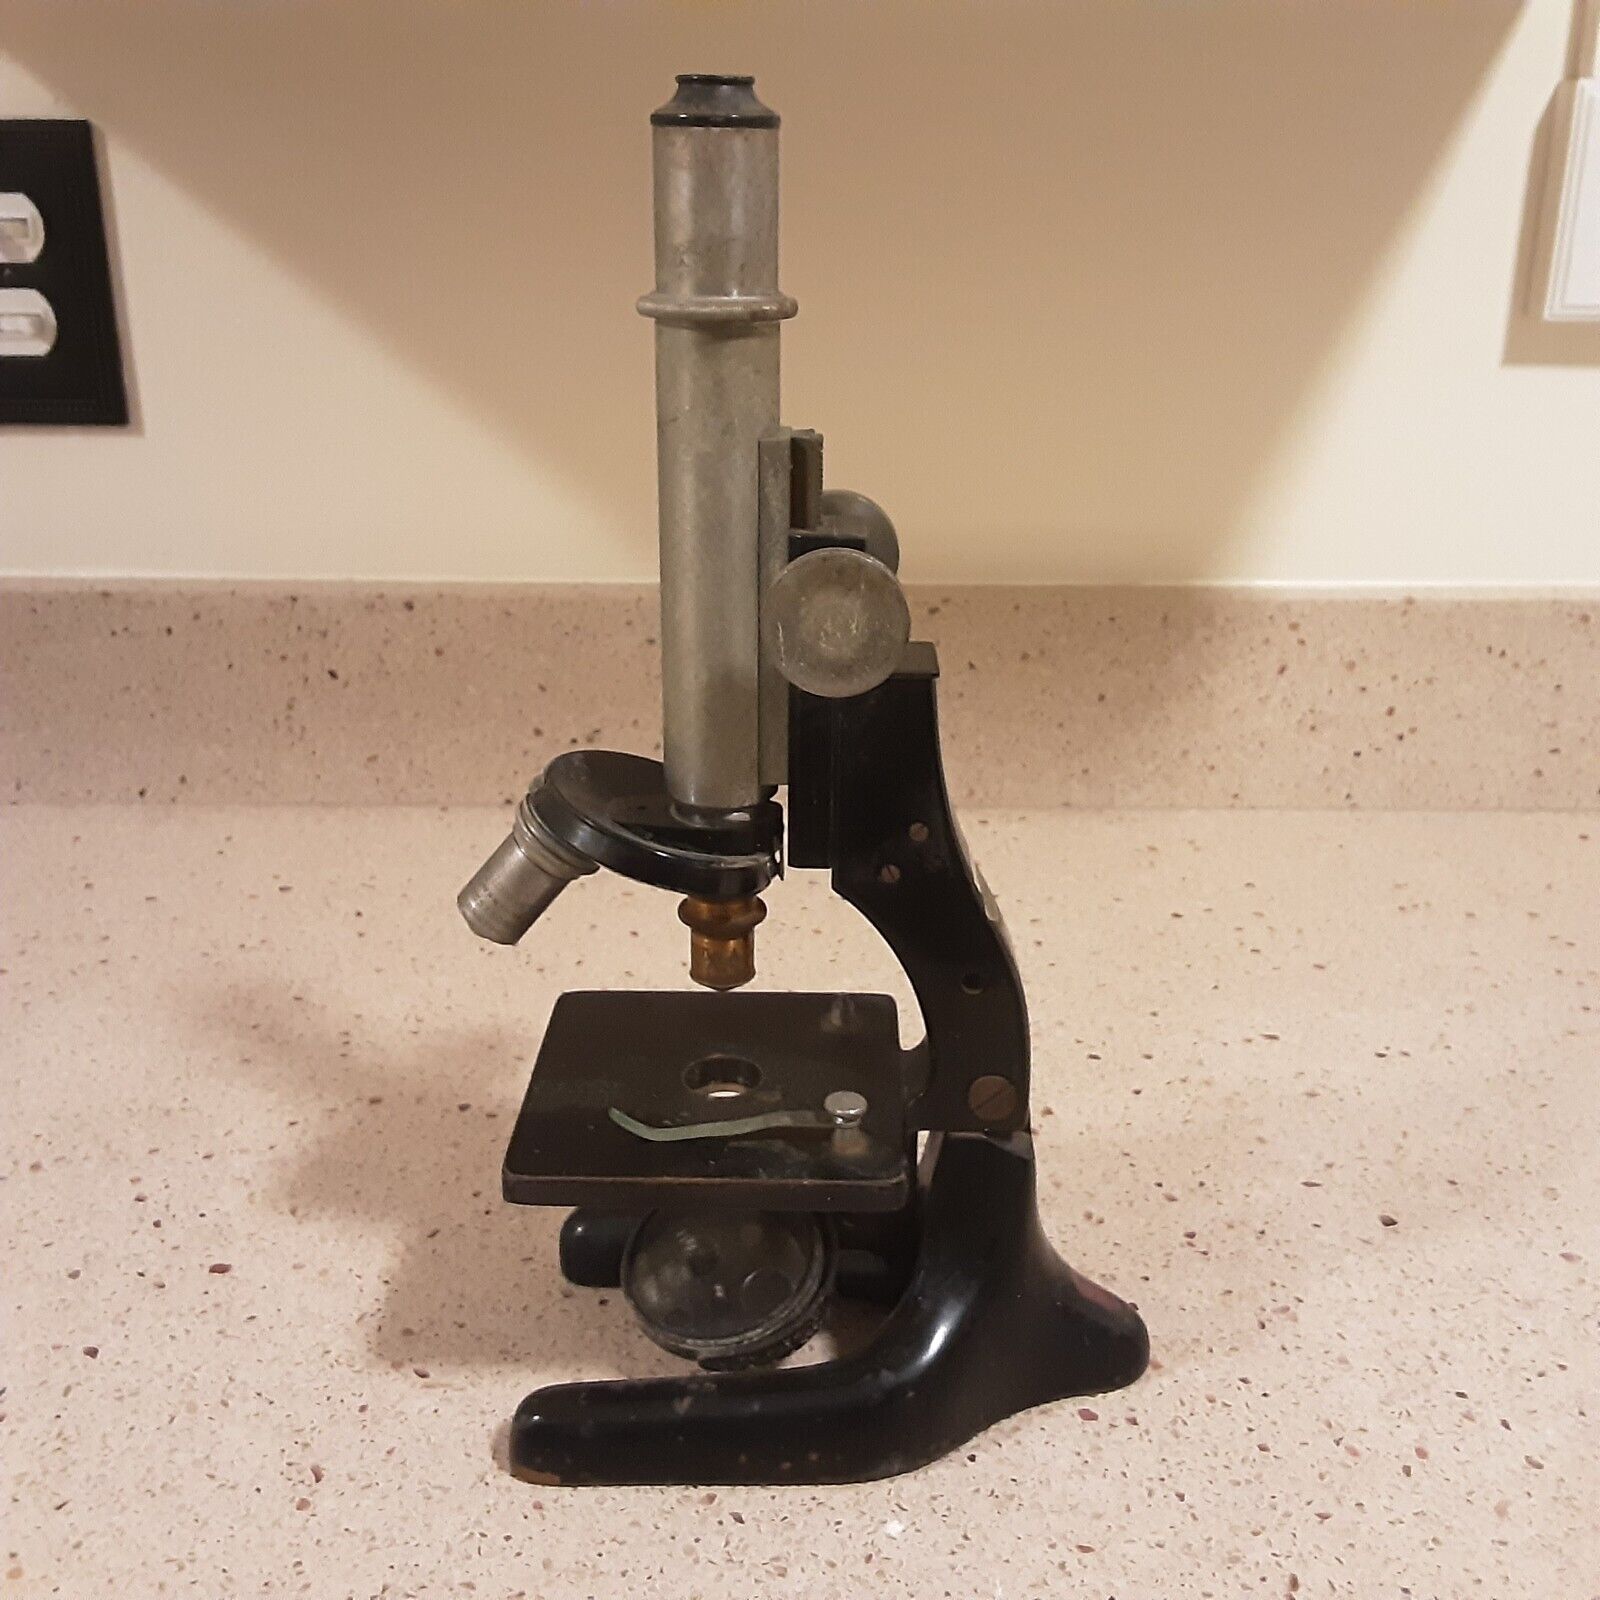 Vintage Bausch & Lomb Microscope For Parts - Serial no. 242462 Manufactured 1934